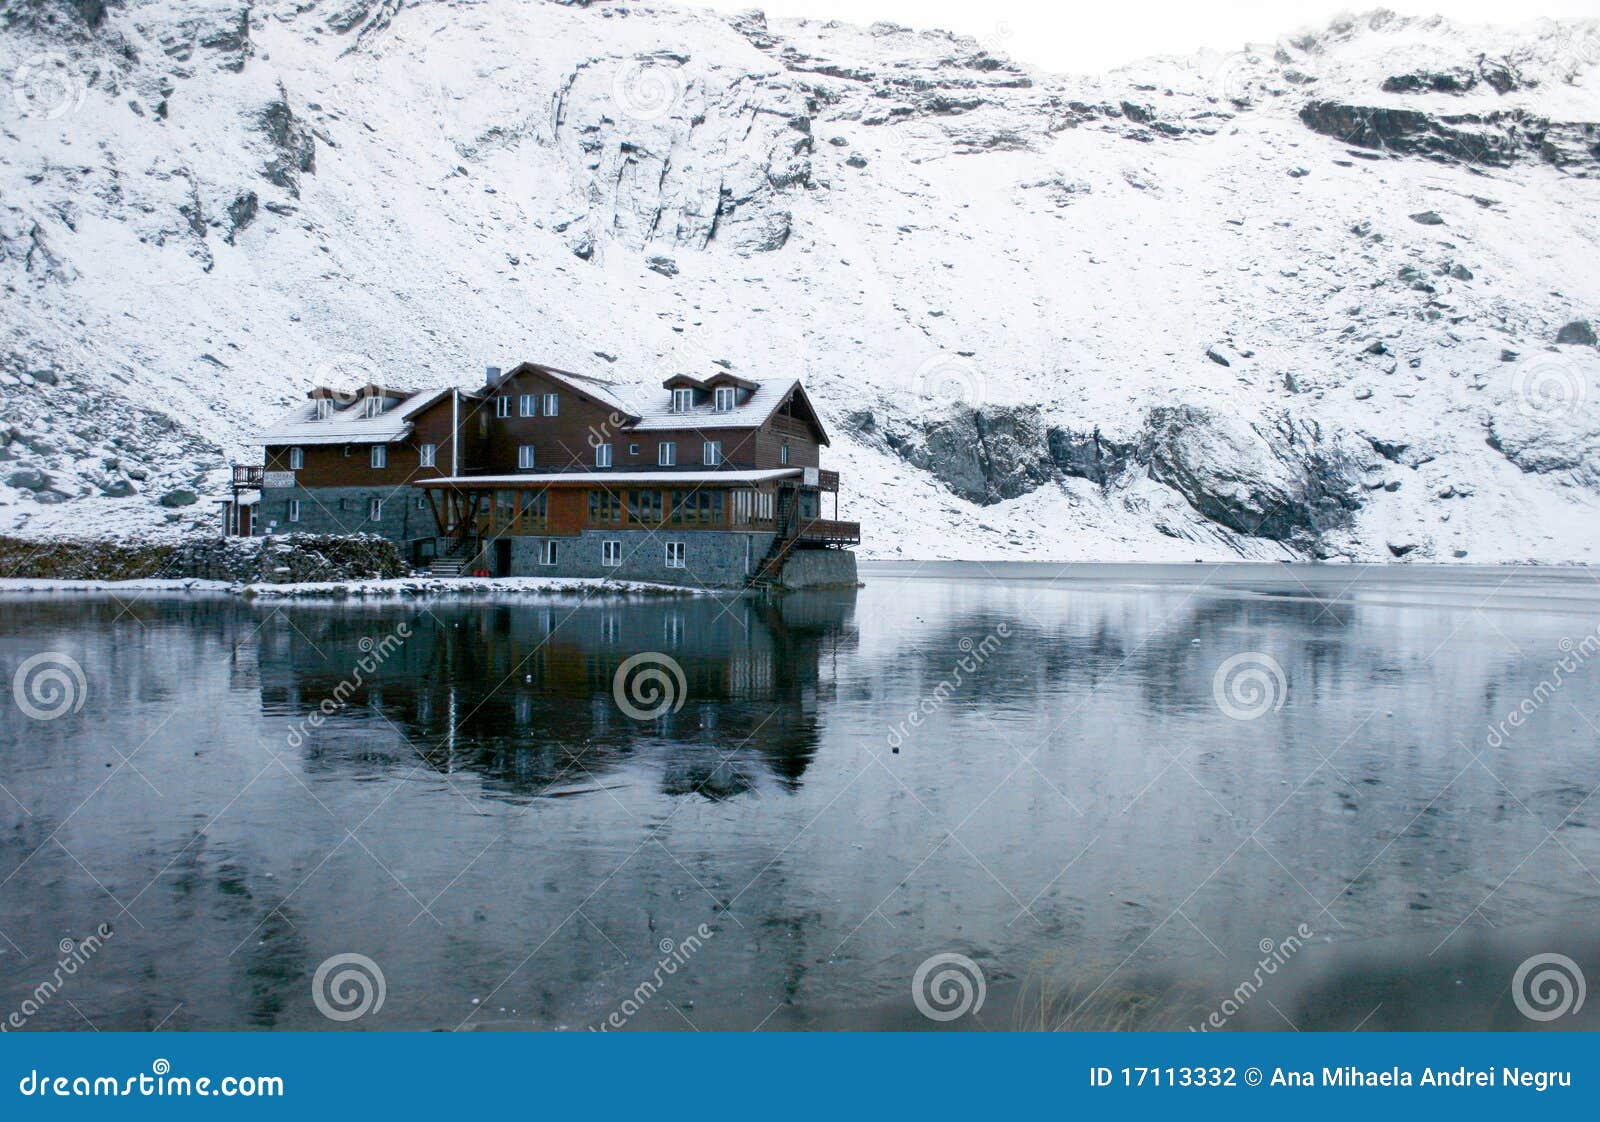 chalet on balea lake and surrounded by mountains